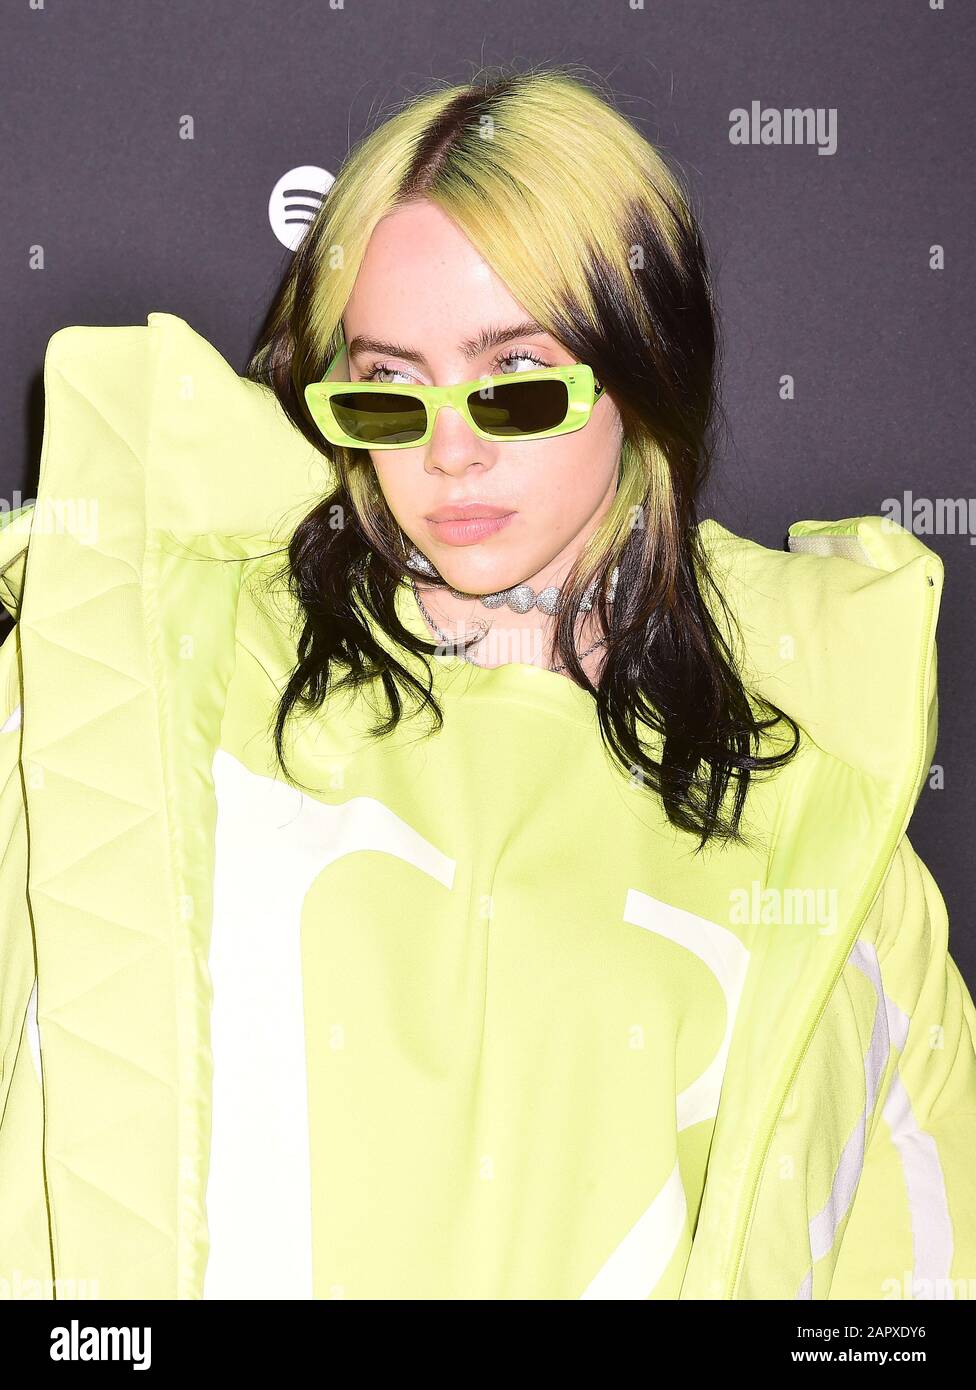 WEST HOLLYWOOD, CA - JANUARY 23: Billie Eilish attends at the Spotify Best New Artist 2020 Party at The Lot Studios on January 23, 2020 in Los Angeles, California. Stock Photo